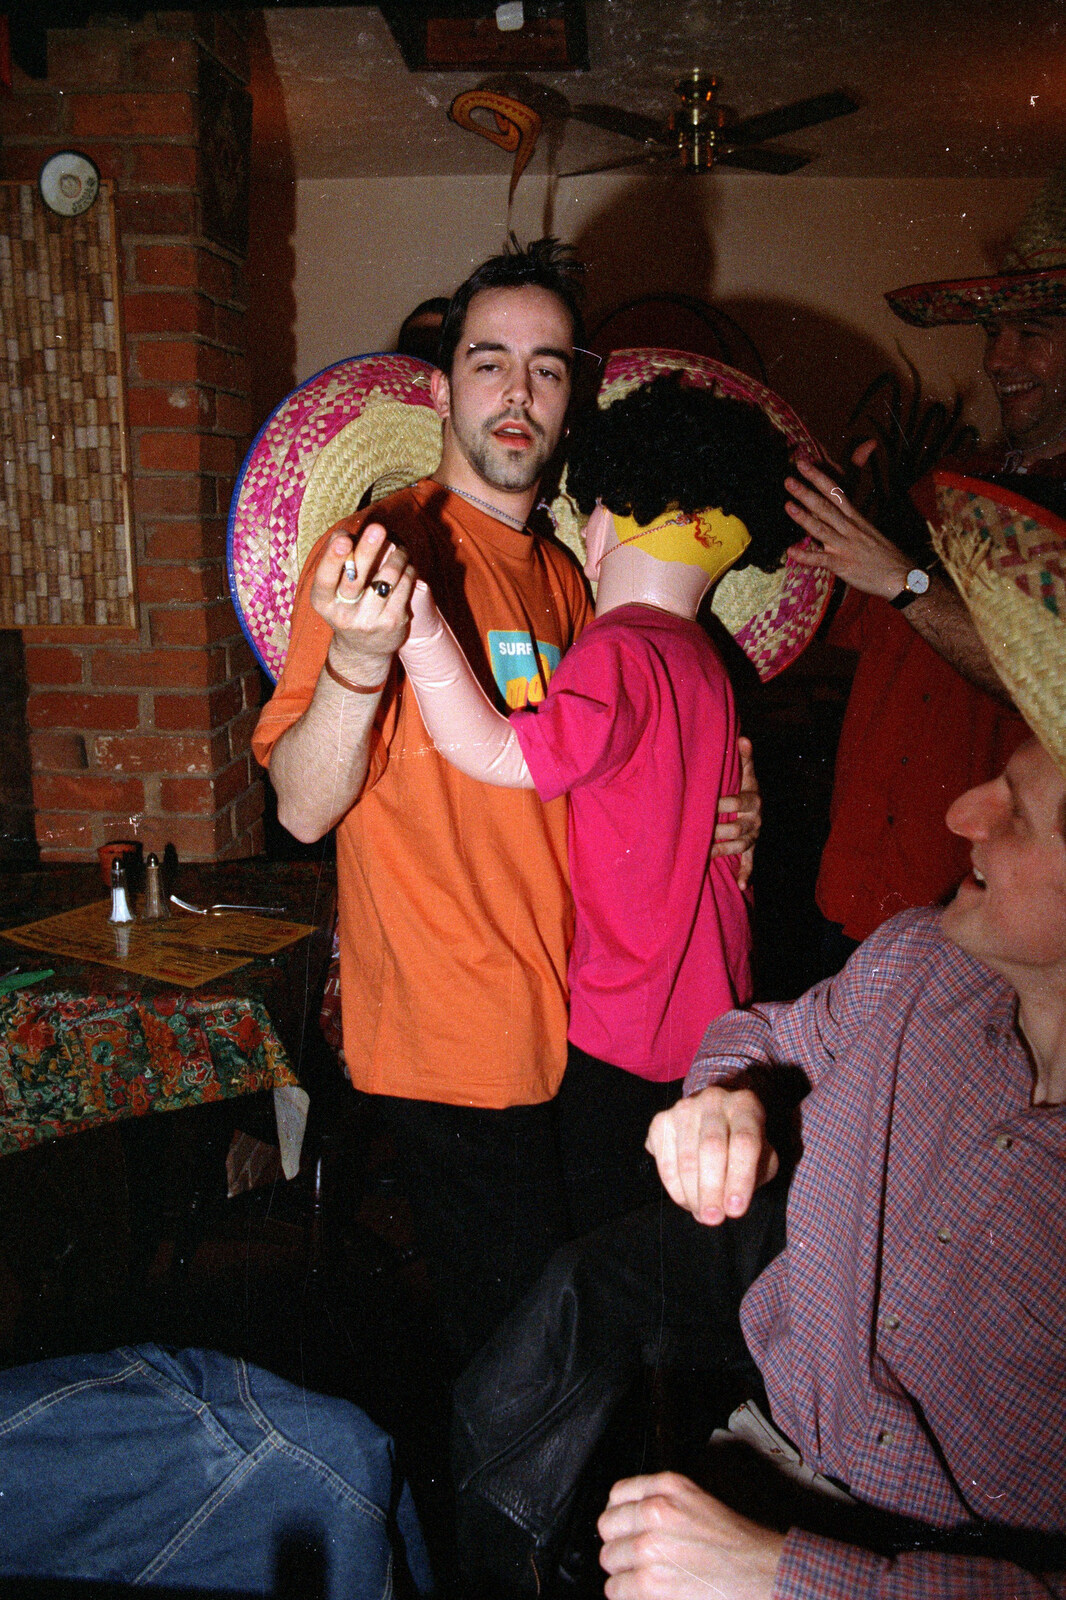 CISU, Los Mexicanos and the Inflatable Woman, Ipswich, Suffolk - 25th April 1996: Trev has a dance